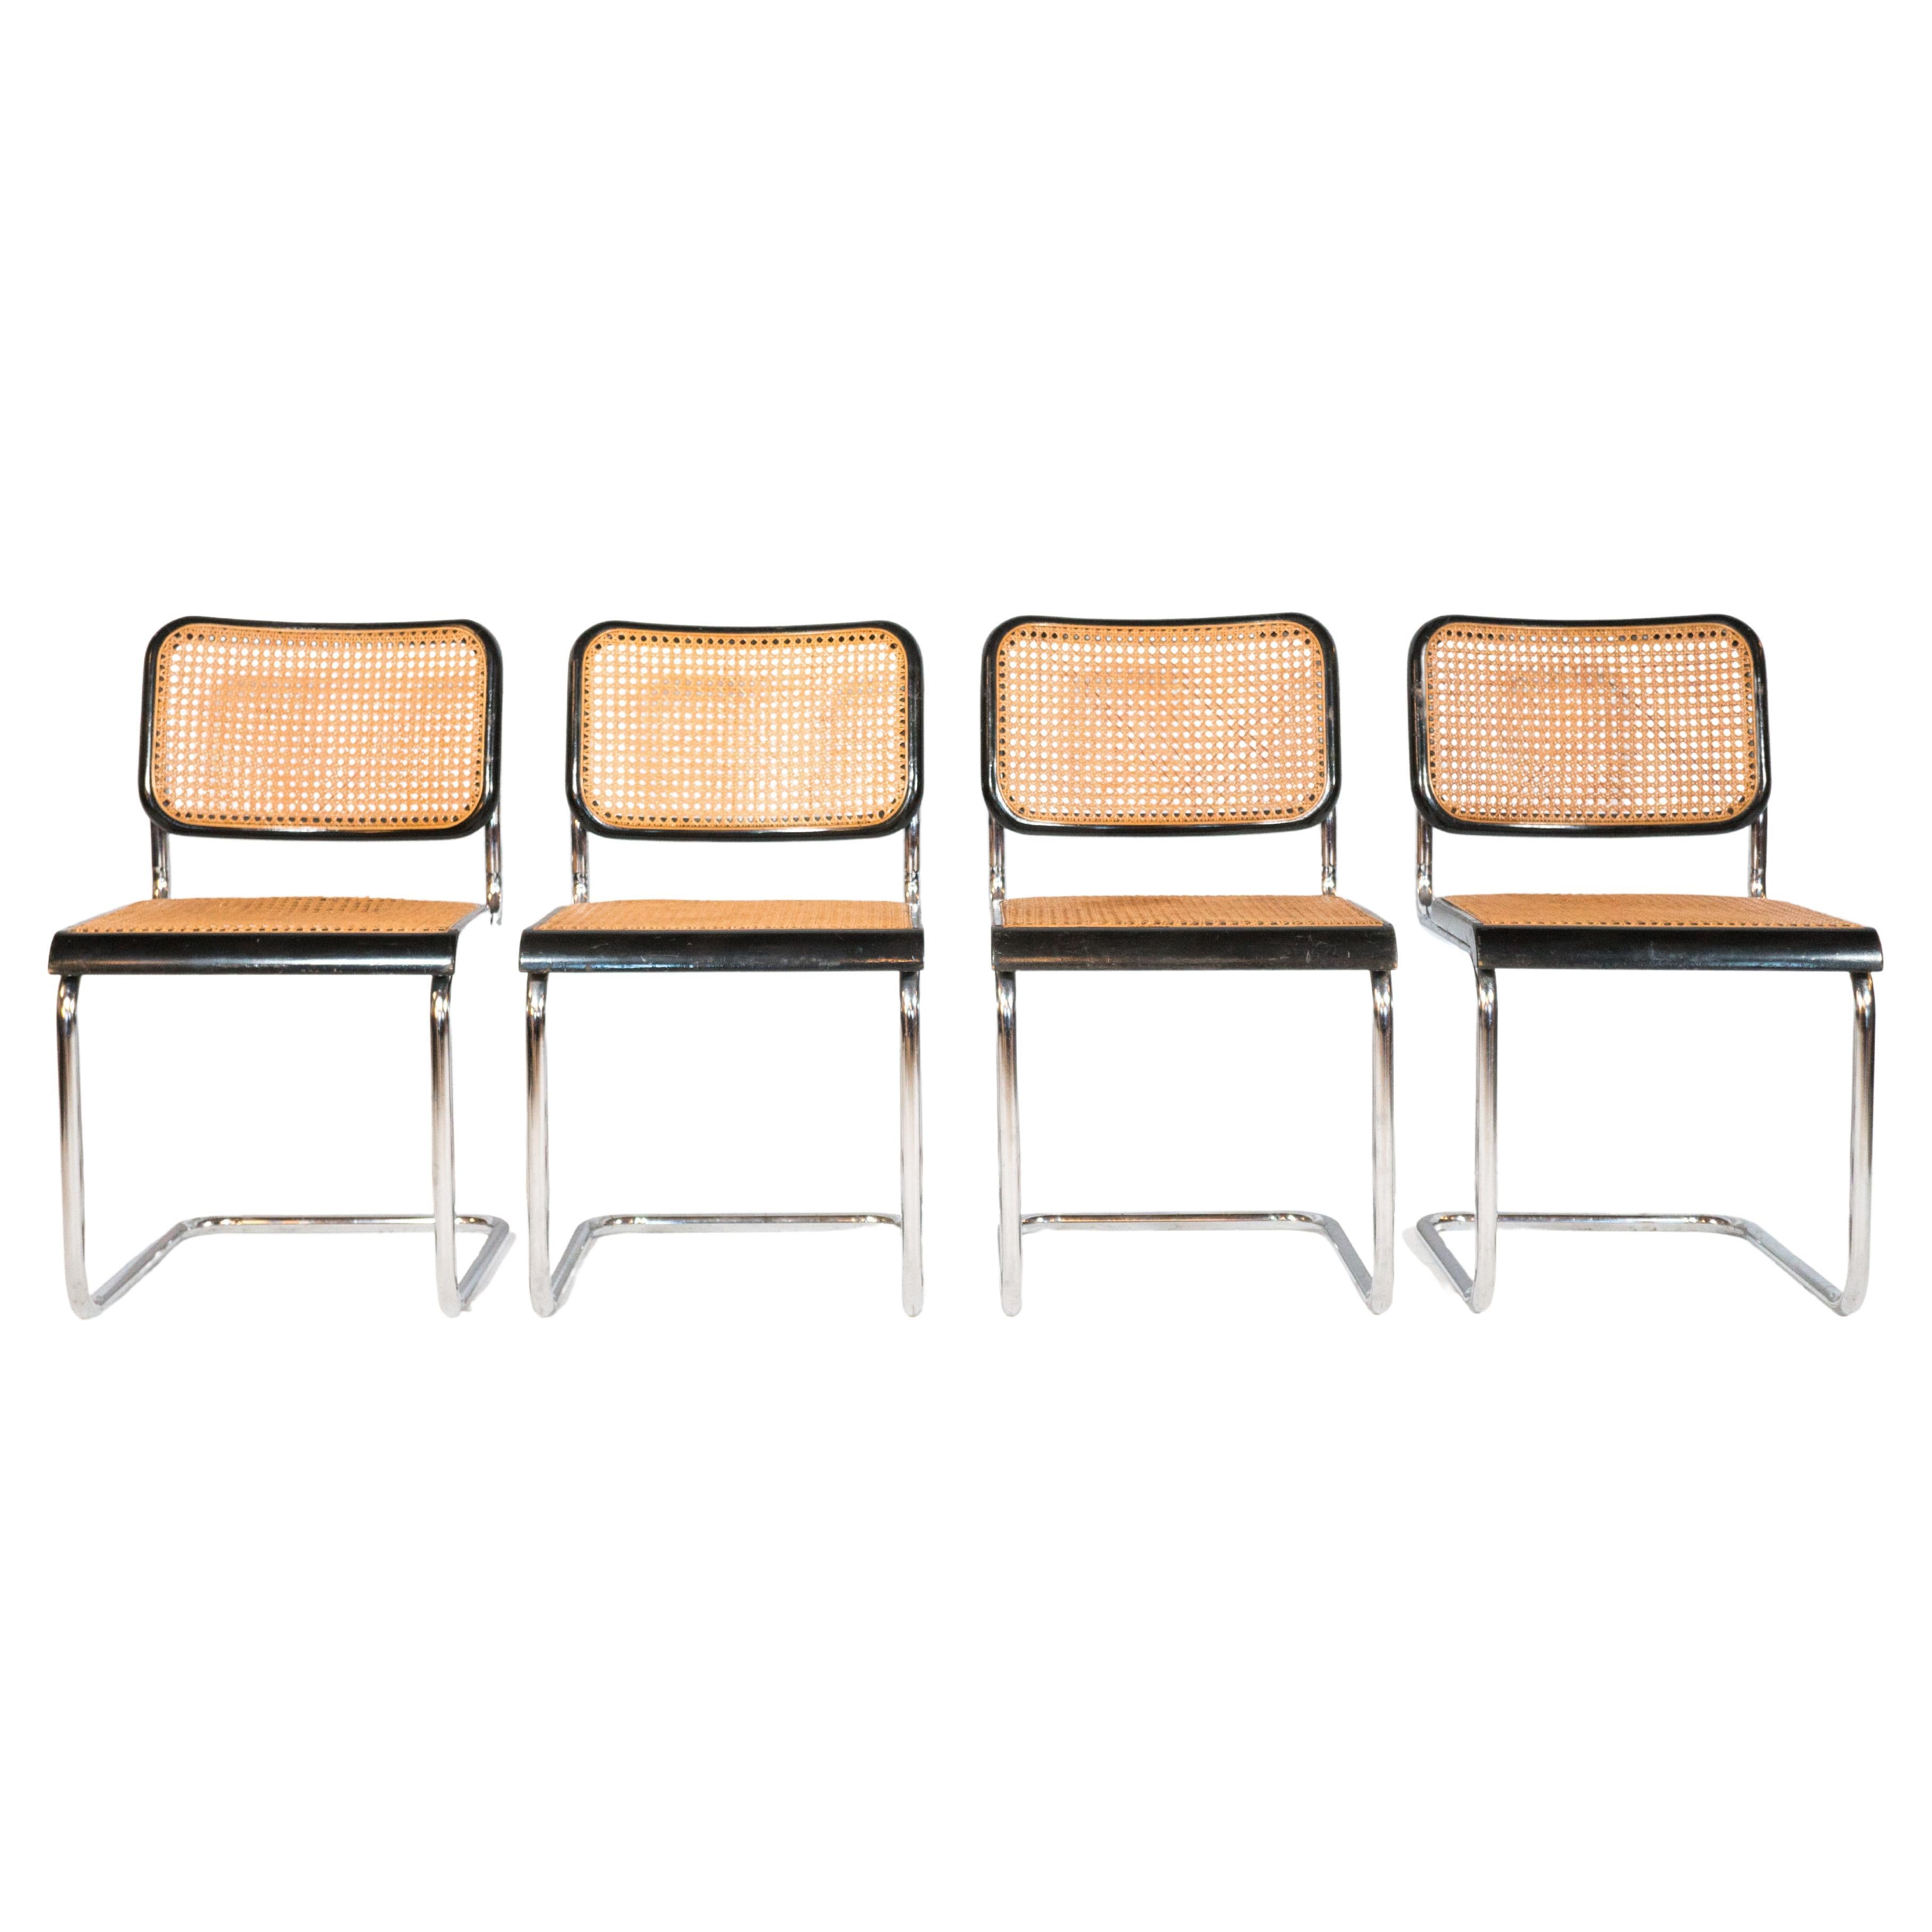 1960s Vintage Marcel Breuer Attributed. Cesca Dining Chairs by Gfm - Set of 4